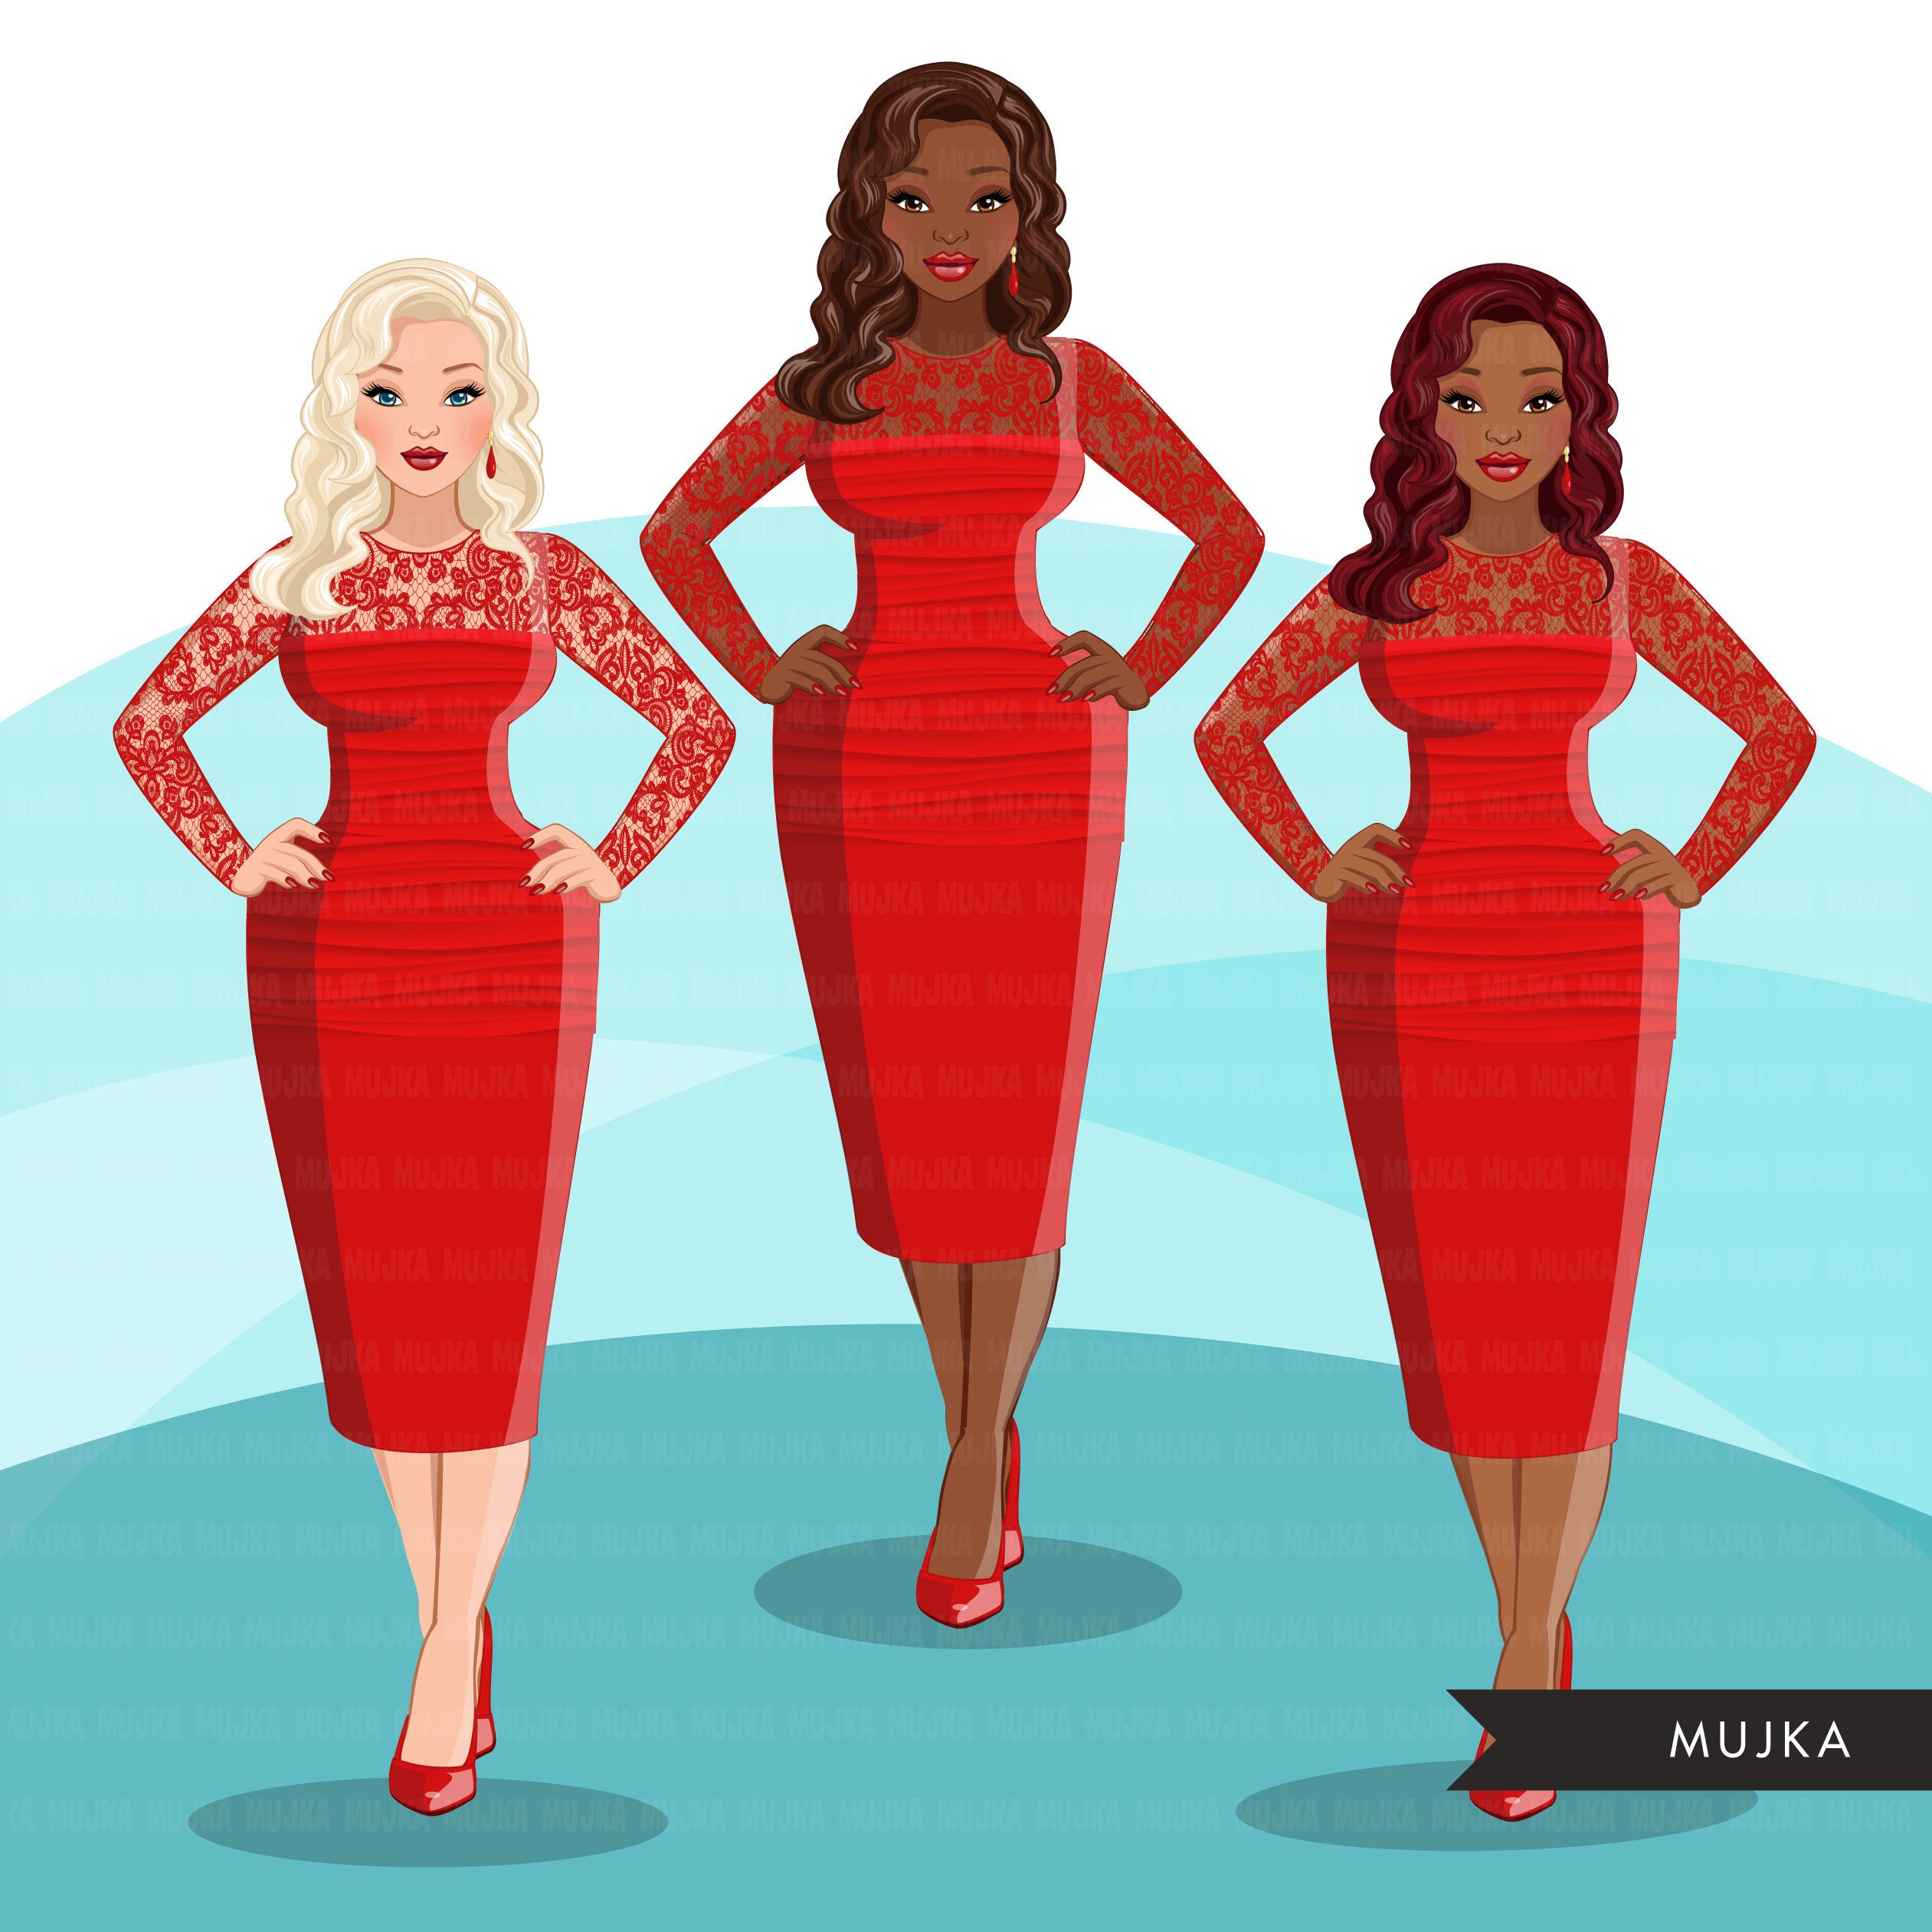 woman in red dress clipart